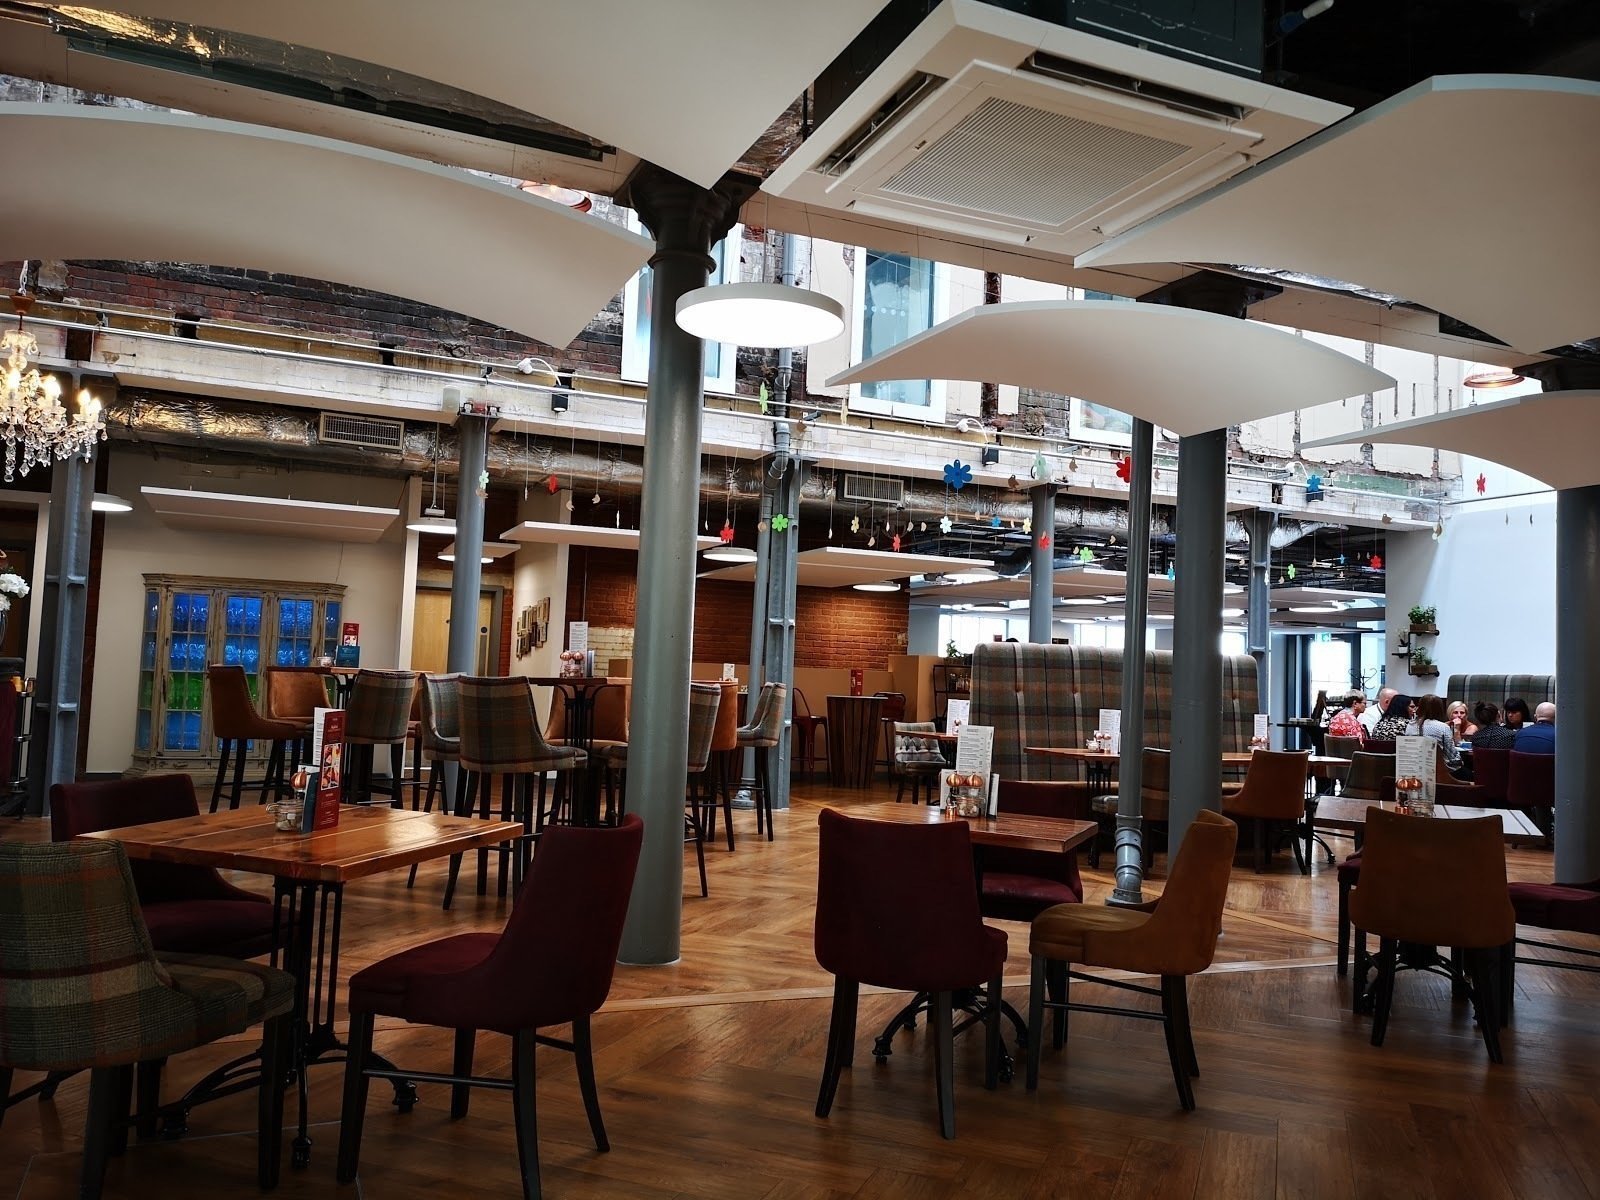 <span class="translation_missing" title="translation missing: en.meta.location_title, location_name: Printworks Kitchen &amp; Bar, city: Leeds">Location Title</span>